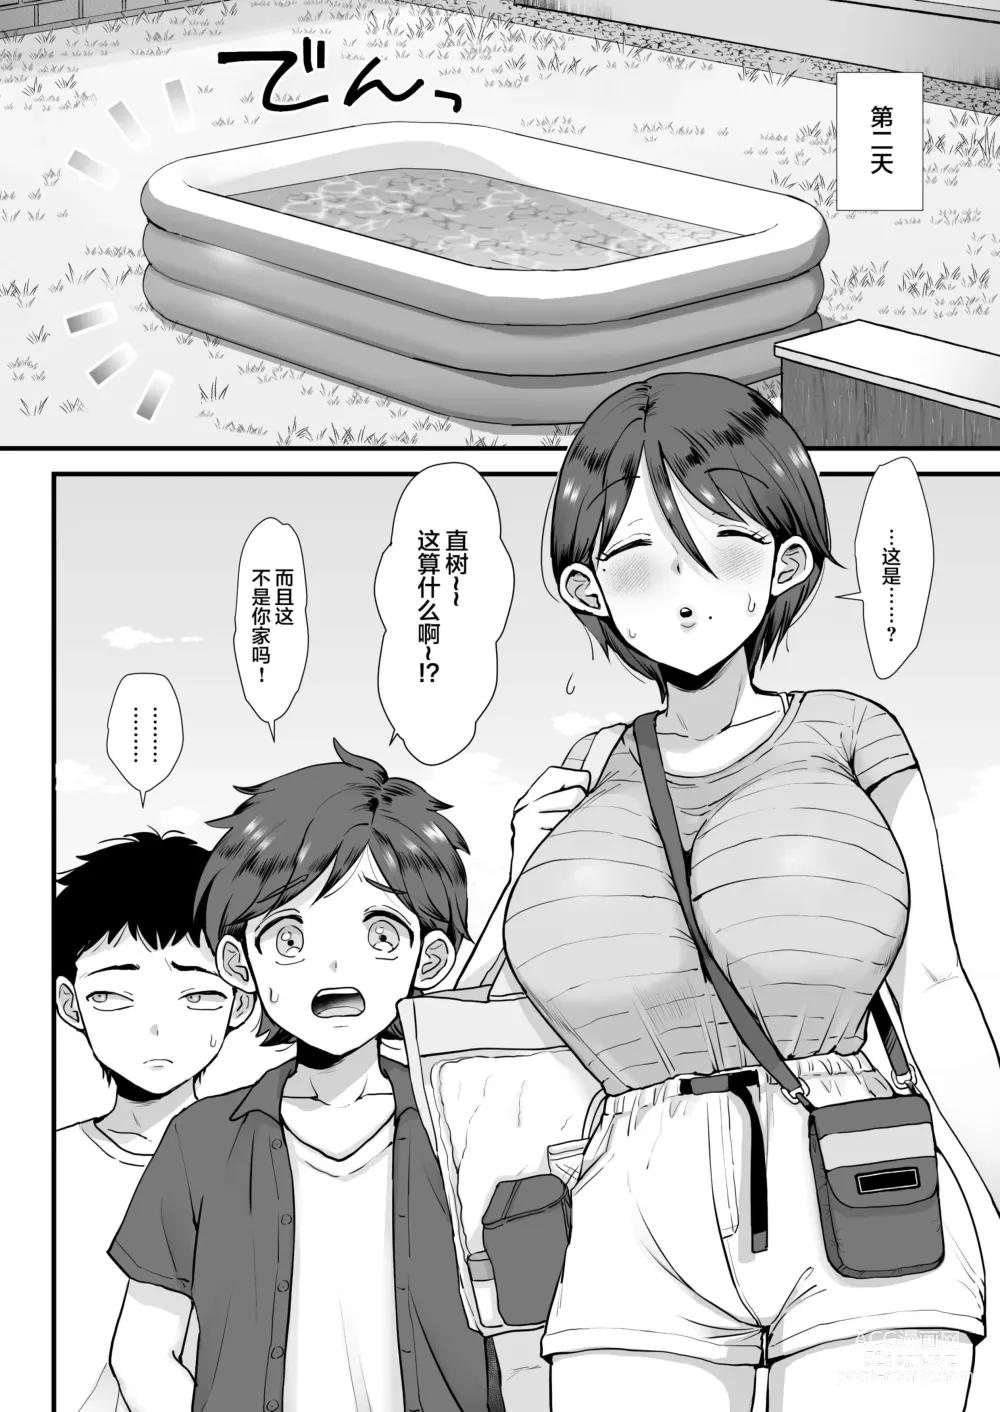 Page 9 of doujinshi sinistra (Eda)] Continued: A laid-back big-breasted mom. [Chinese translation